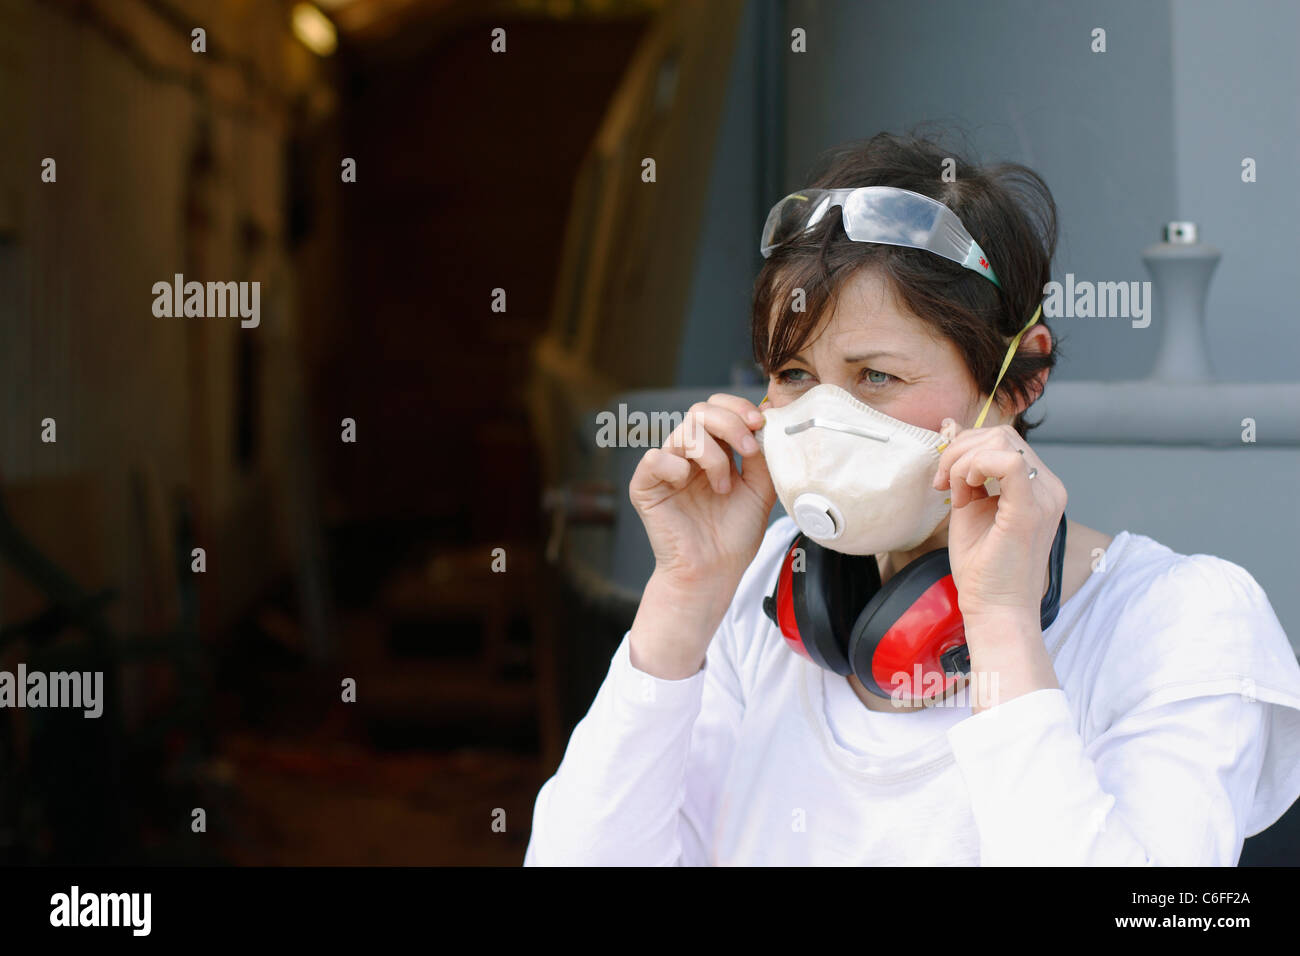 A young woman putting on a face mask, ear defenders and safety goggles for protection whilst working. Stock Photo